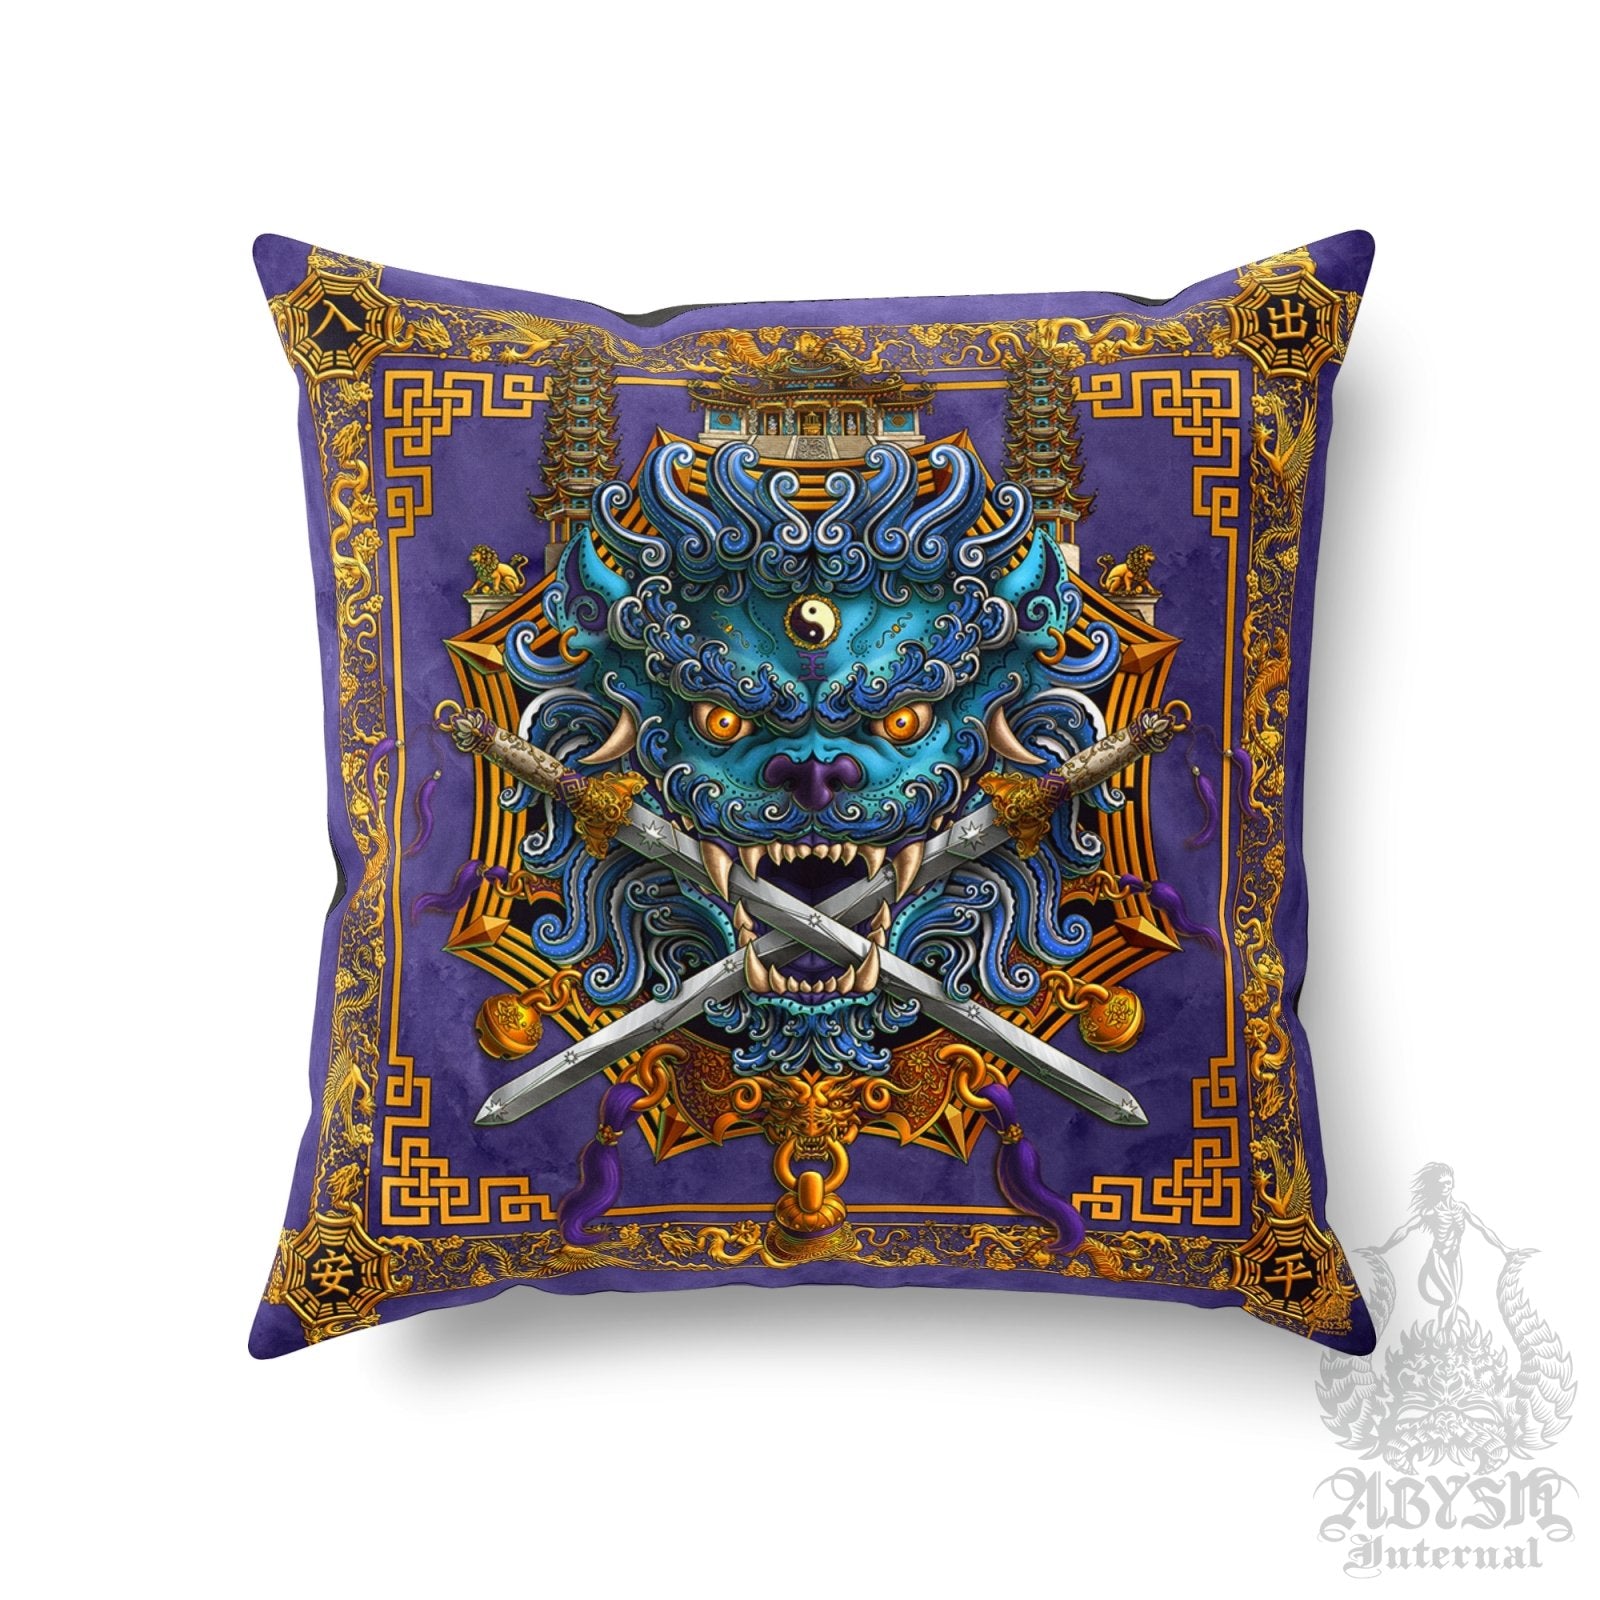 Asian Lion Throw Pillow, Decorative Accent Cushion, Taiwan Sword Lion, Chinese Art, Game Room Decor, Alternative Home, Funky and Eclectic - Blue & Purple - Abysm Internal